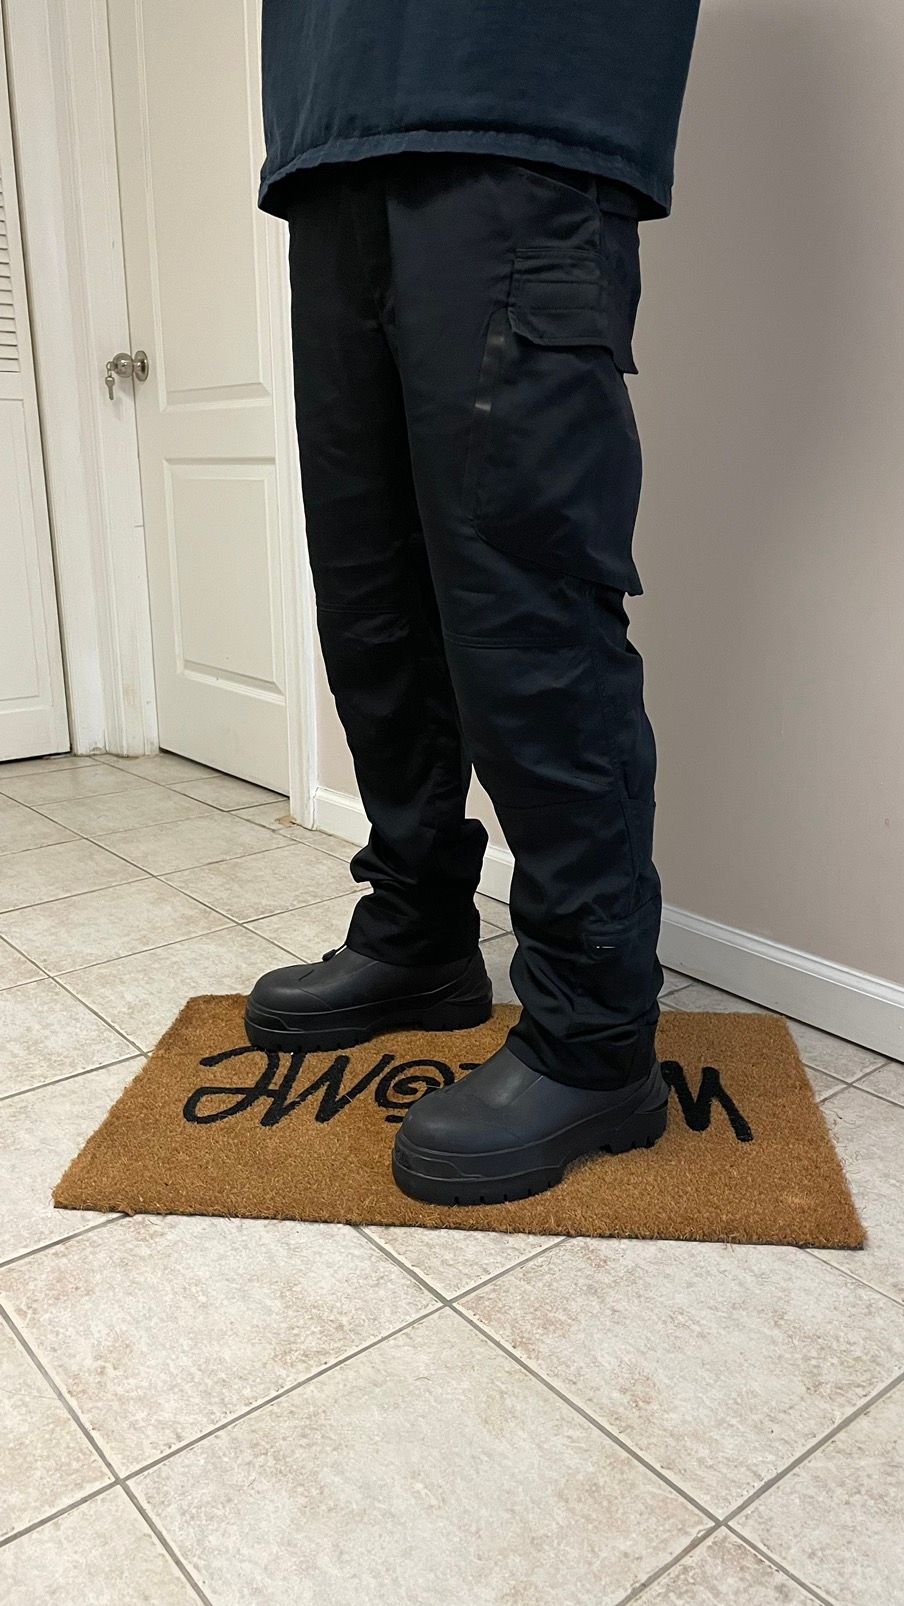 Alyx Alyx Black Tactical Cargo Pants Size US 33 - 2 Preview